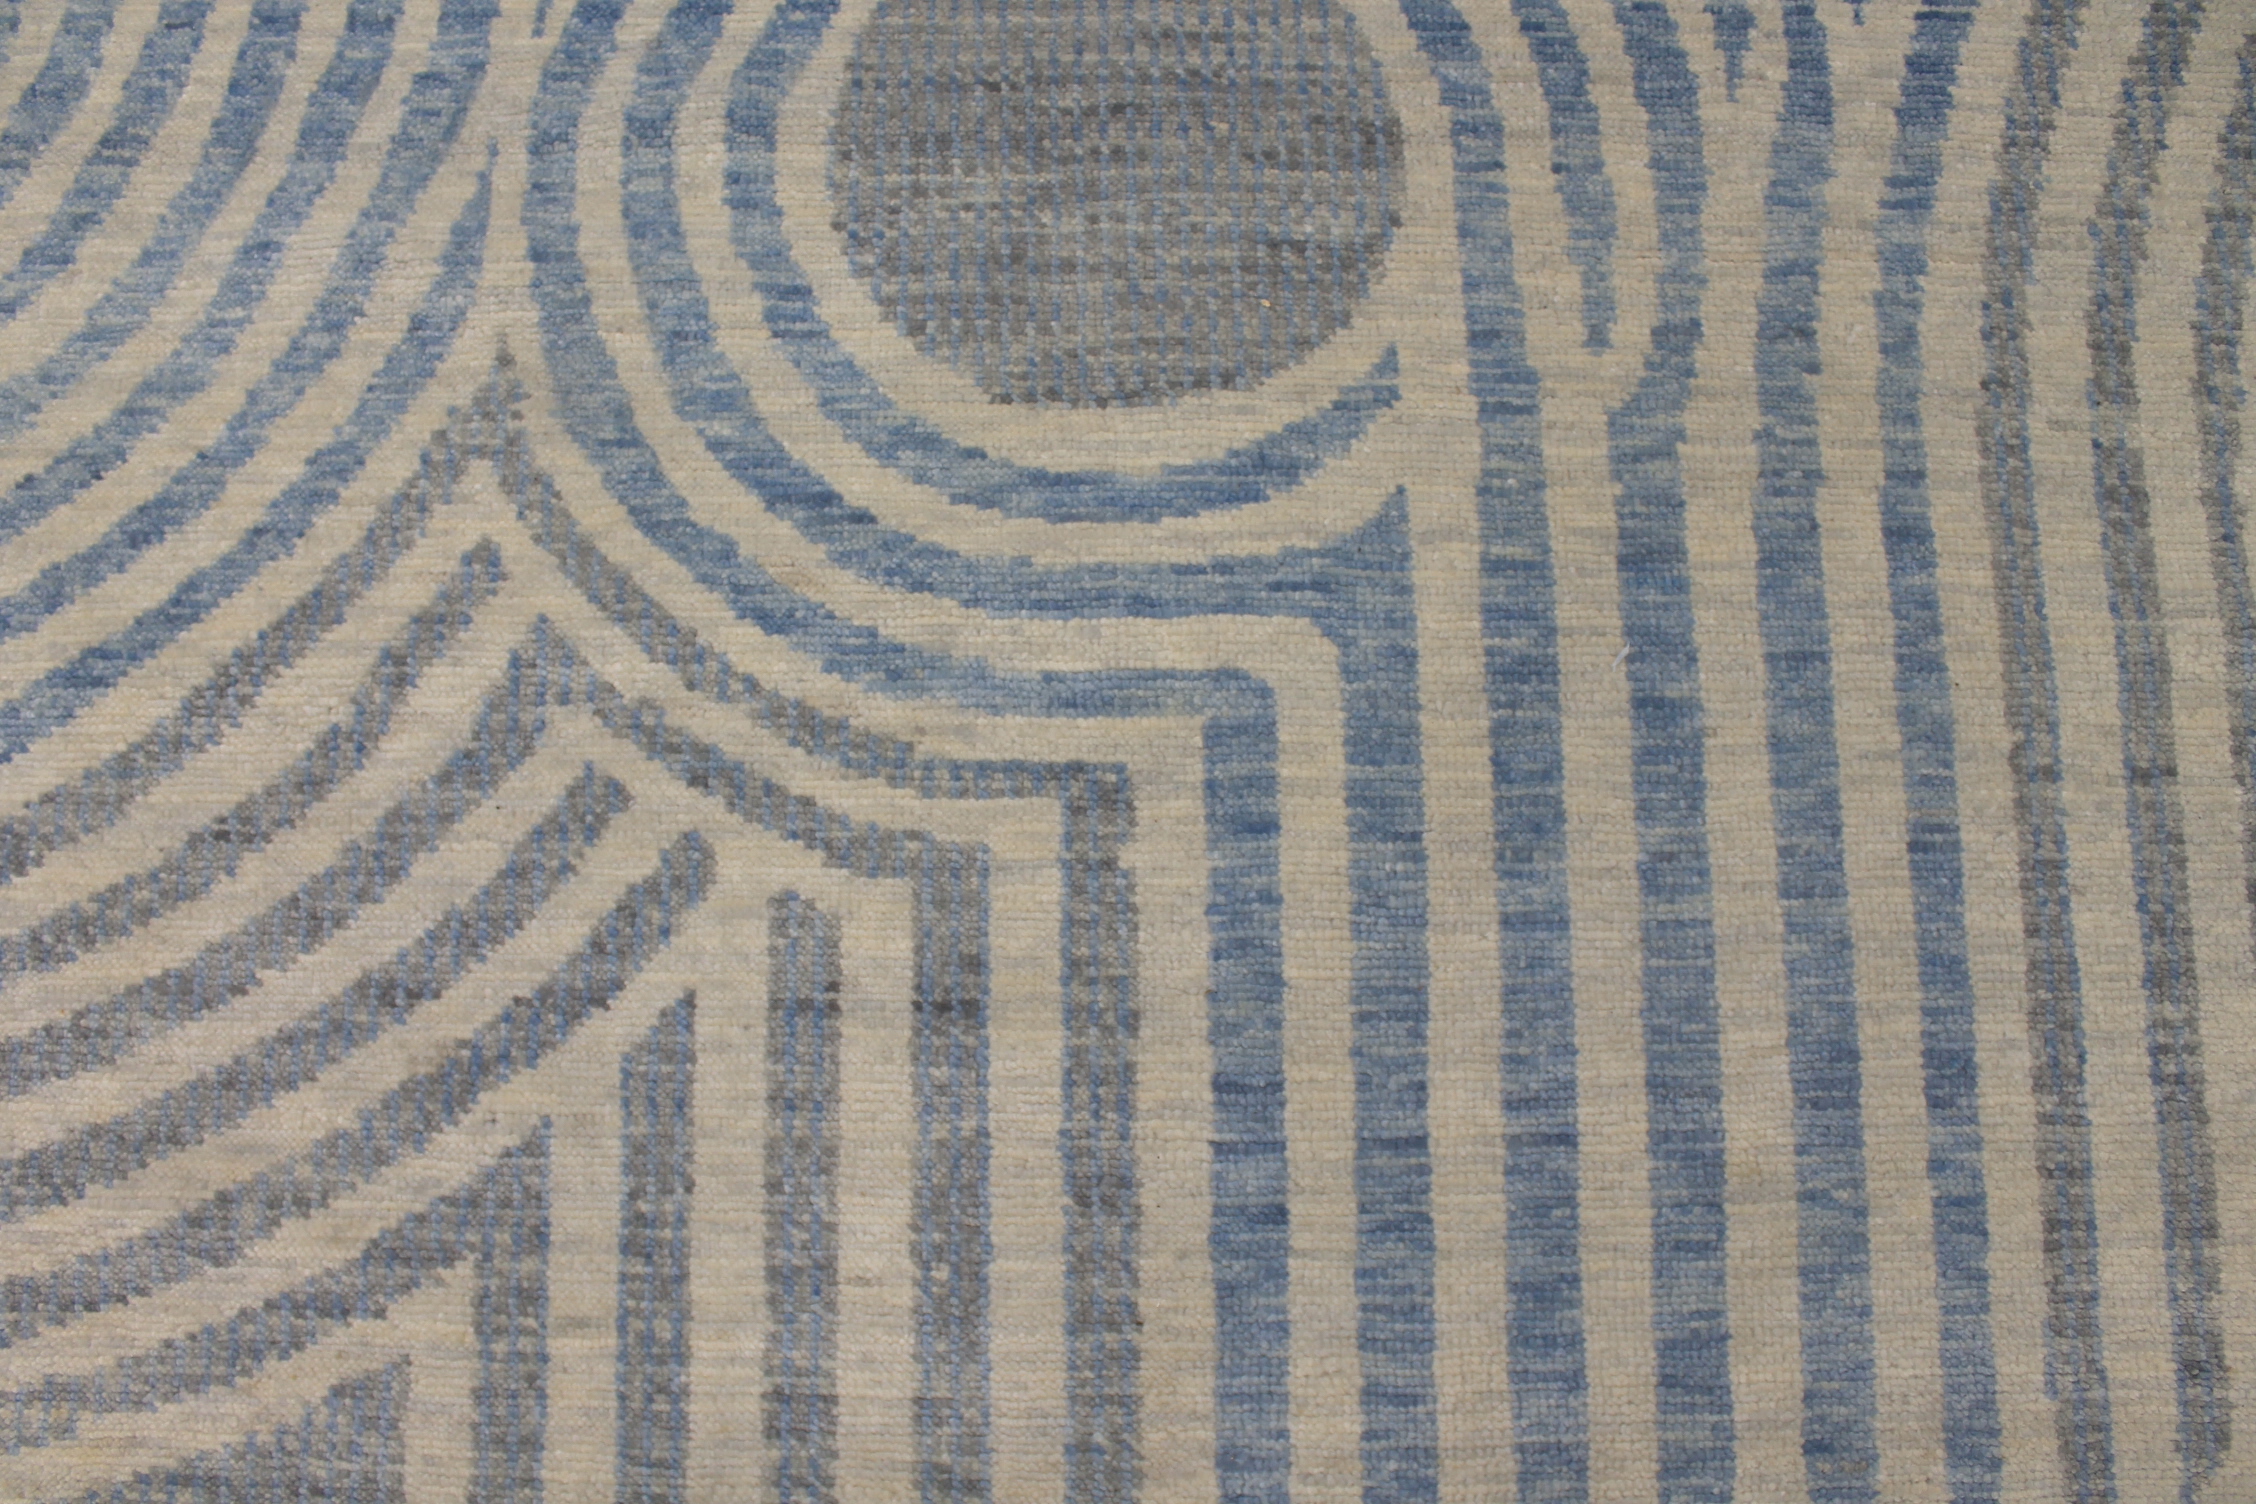 Contemporary & Transitional Rugs EDGE 027552 Medium Blue - Navy & Lt. Grey - Grey Hand Knotted Rug